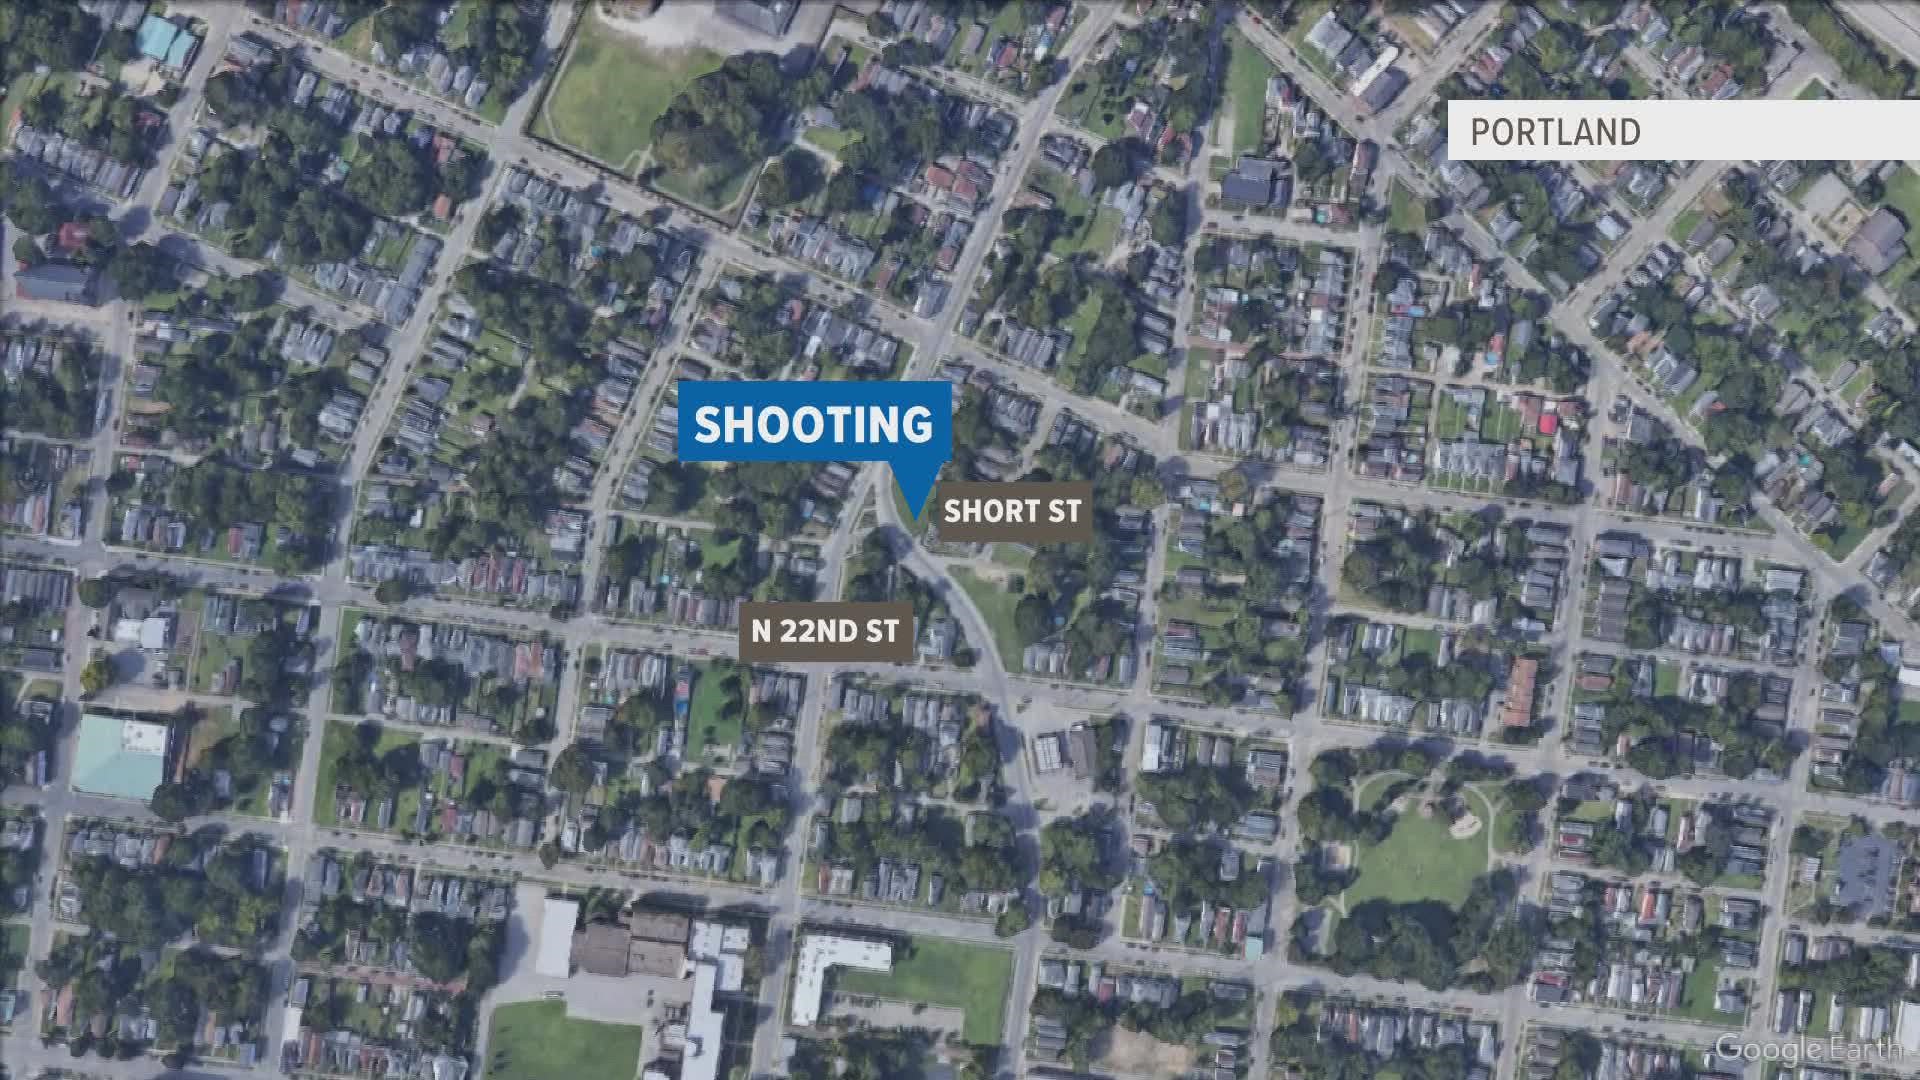 Louisville police are investigating separate shootings across the city that left 2 injured and a 14-year-old dead on Sunday.